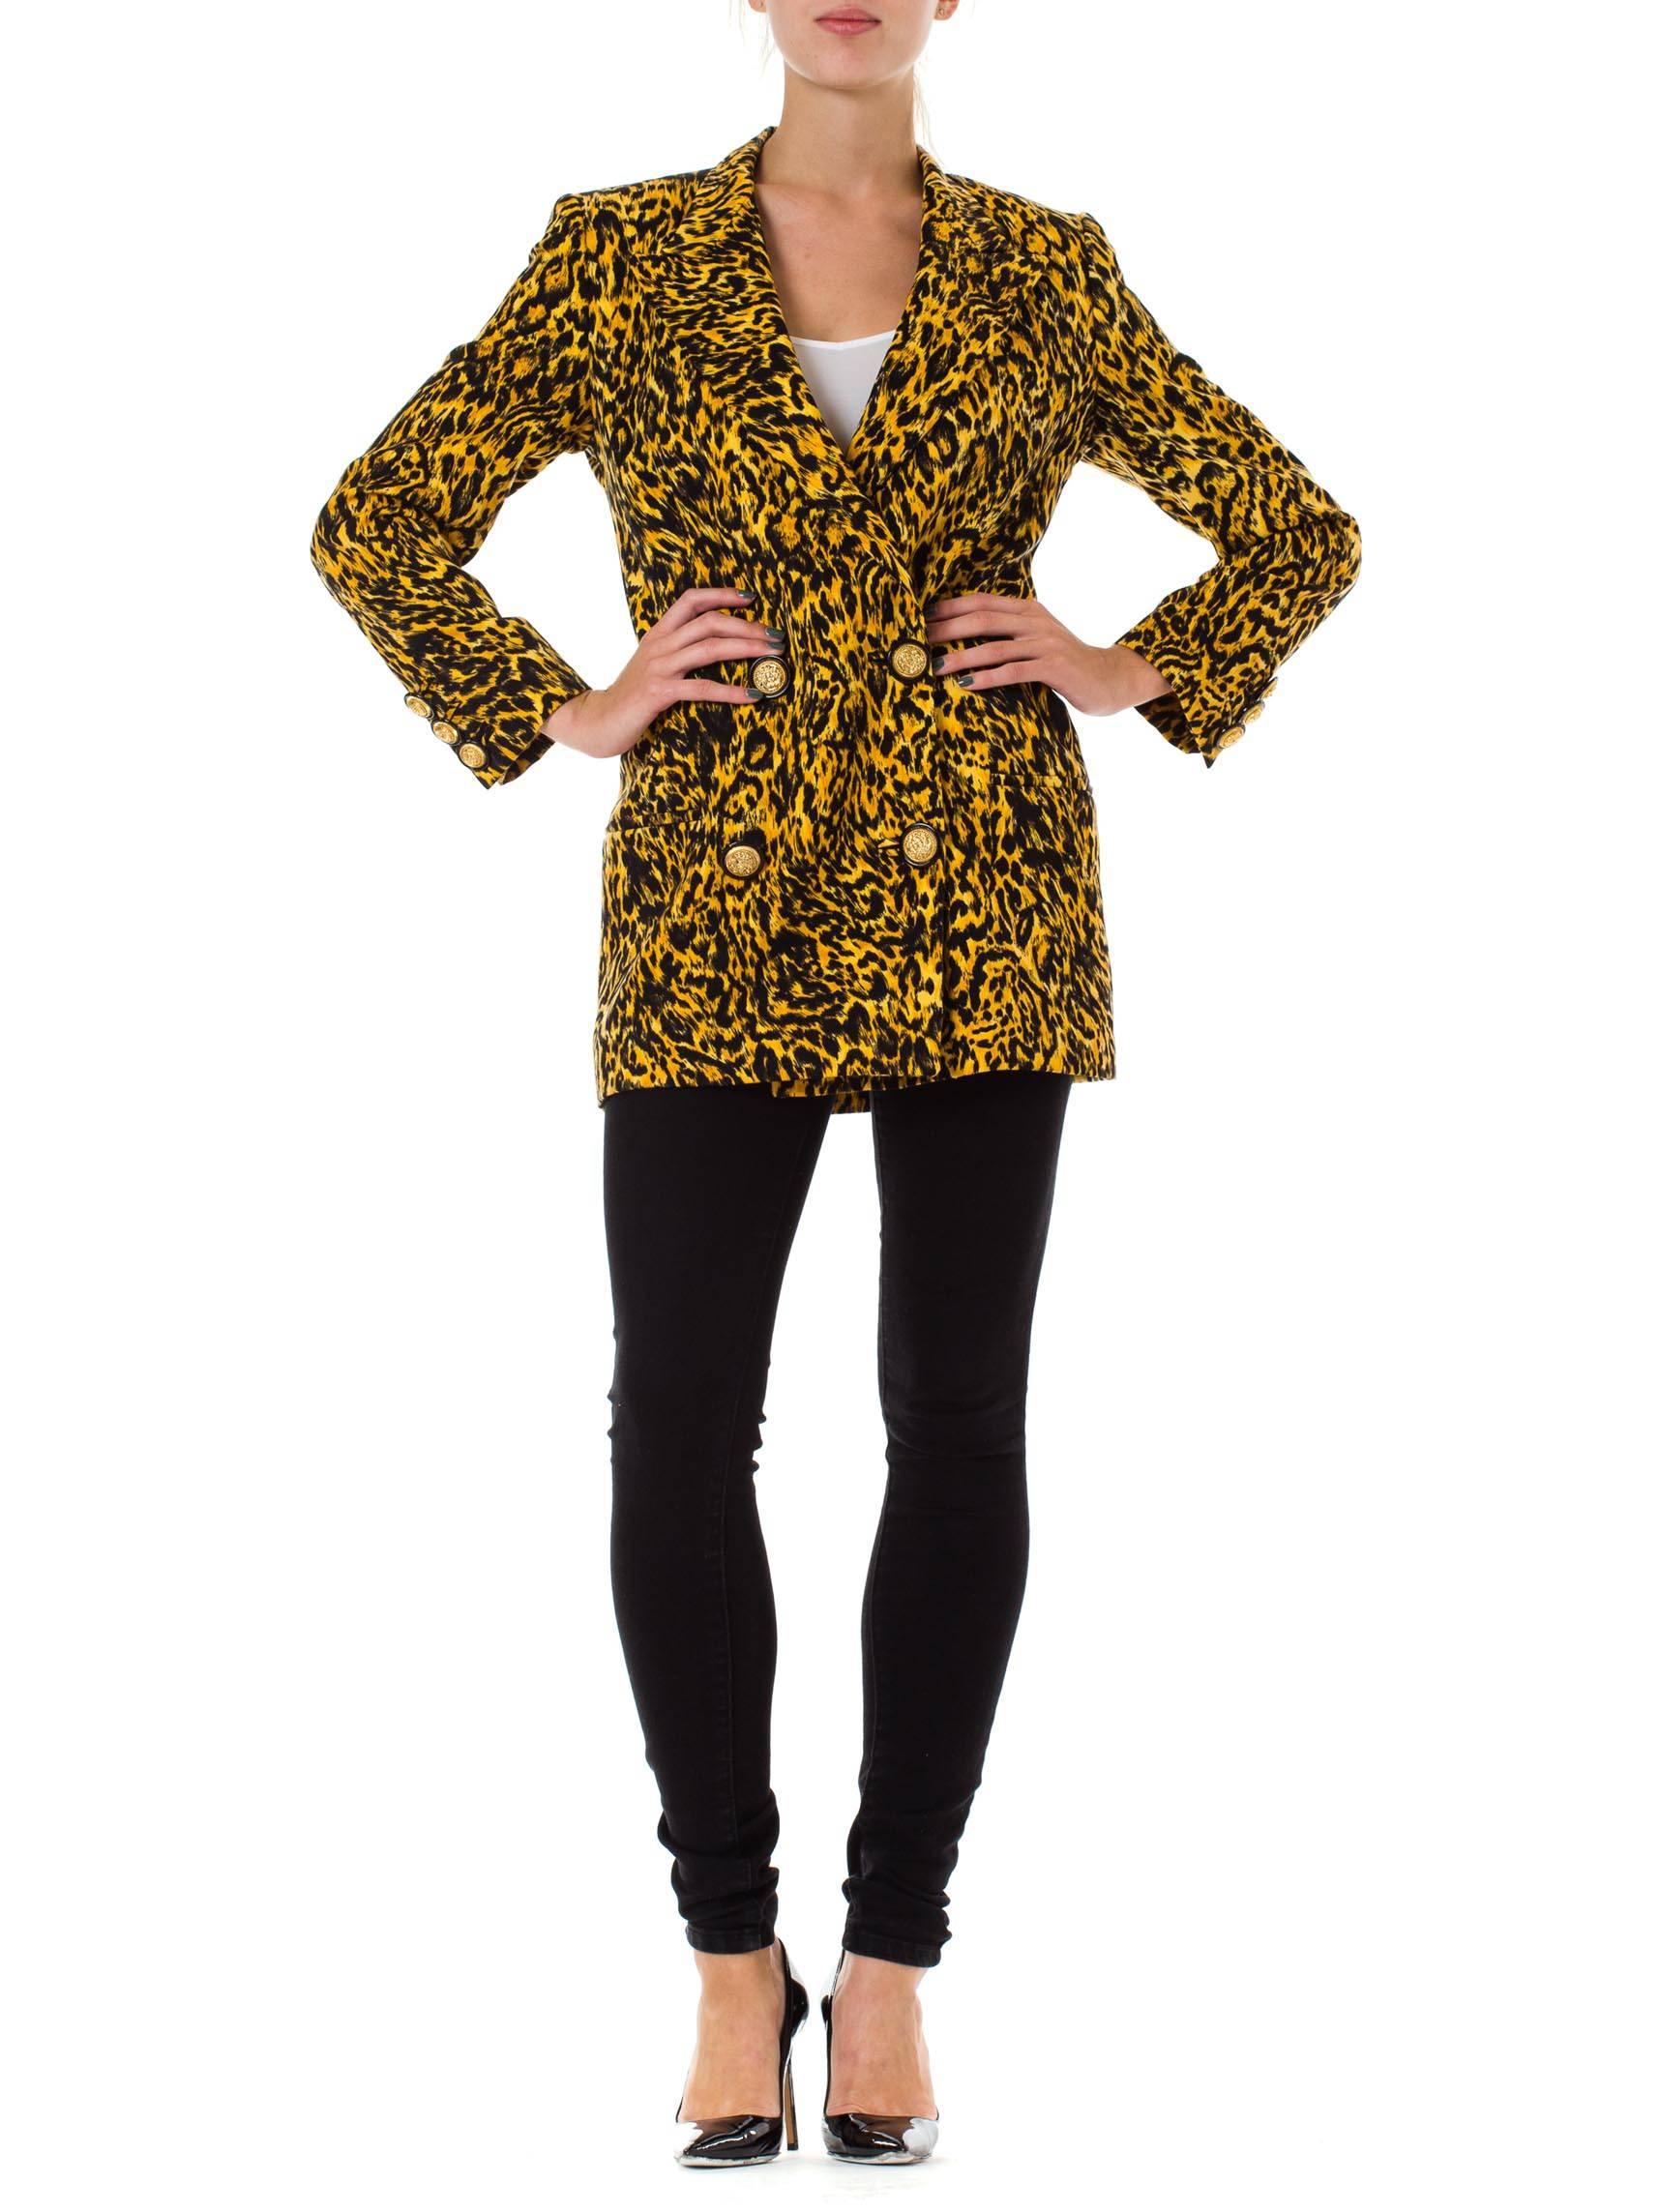 We love a catwoman in the boardroom and so does Gianni Versace. From design meetings to press events to the club this jacket is sure to grab the attentiino of many with iconic Gianni Versace panache. Dating from the early 1990s when leopard was his